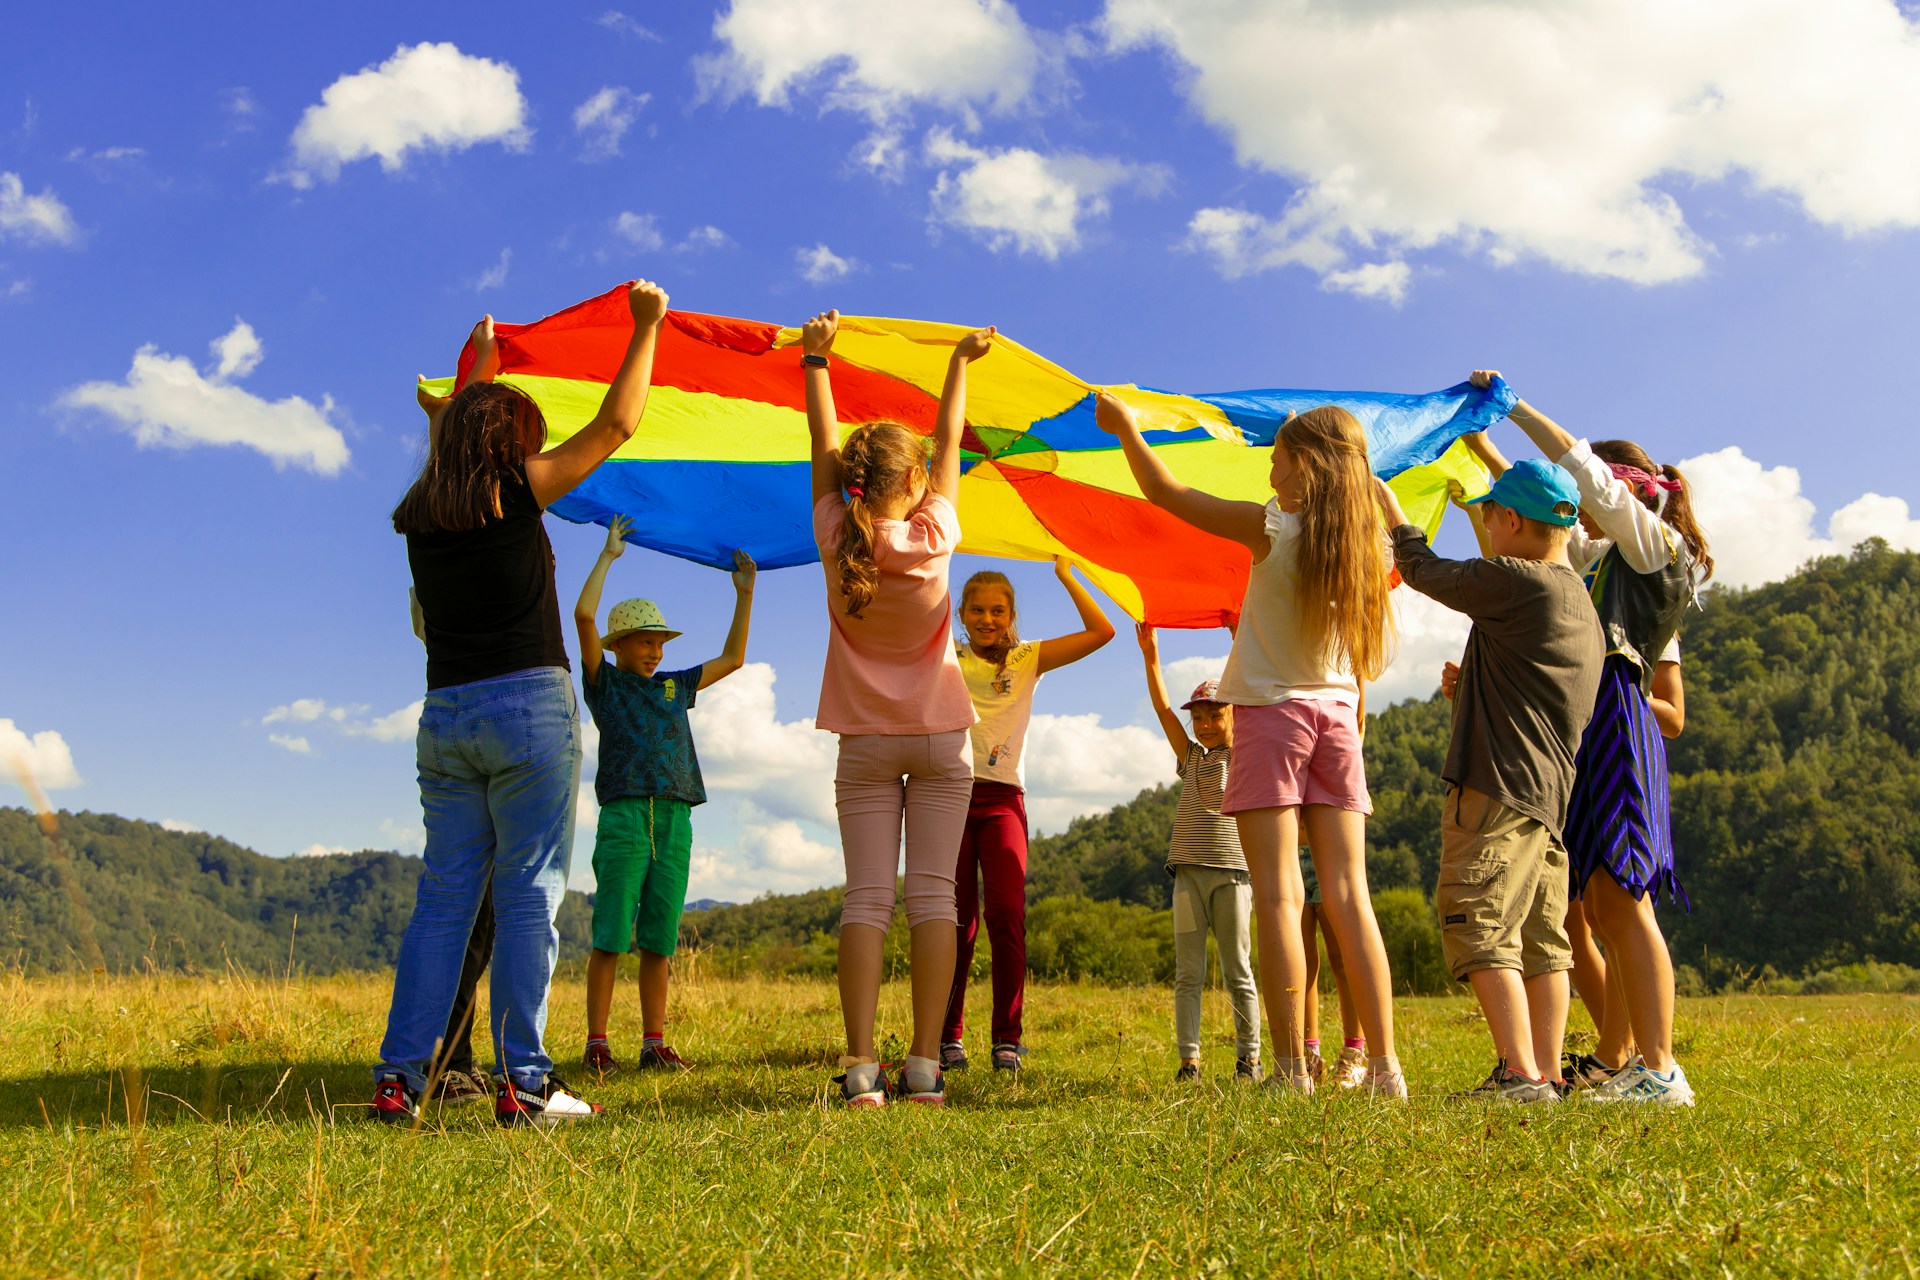 If you've got some active kids who hate sitting around, love making new friends, and enjoy being outside, sign them up for summer camp! It's the perfect way to provide them with plenty of activities that match their interests.